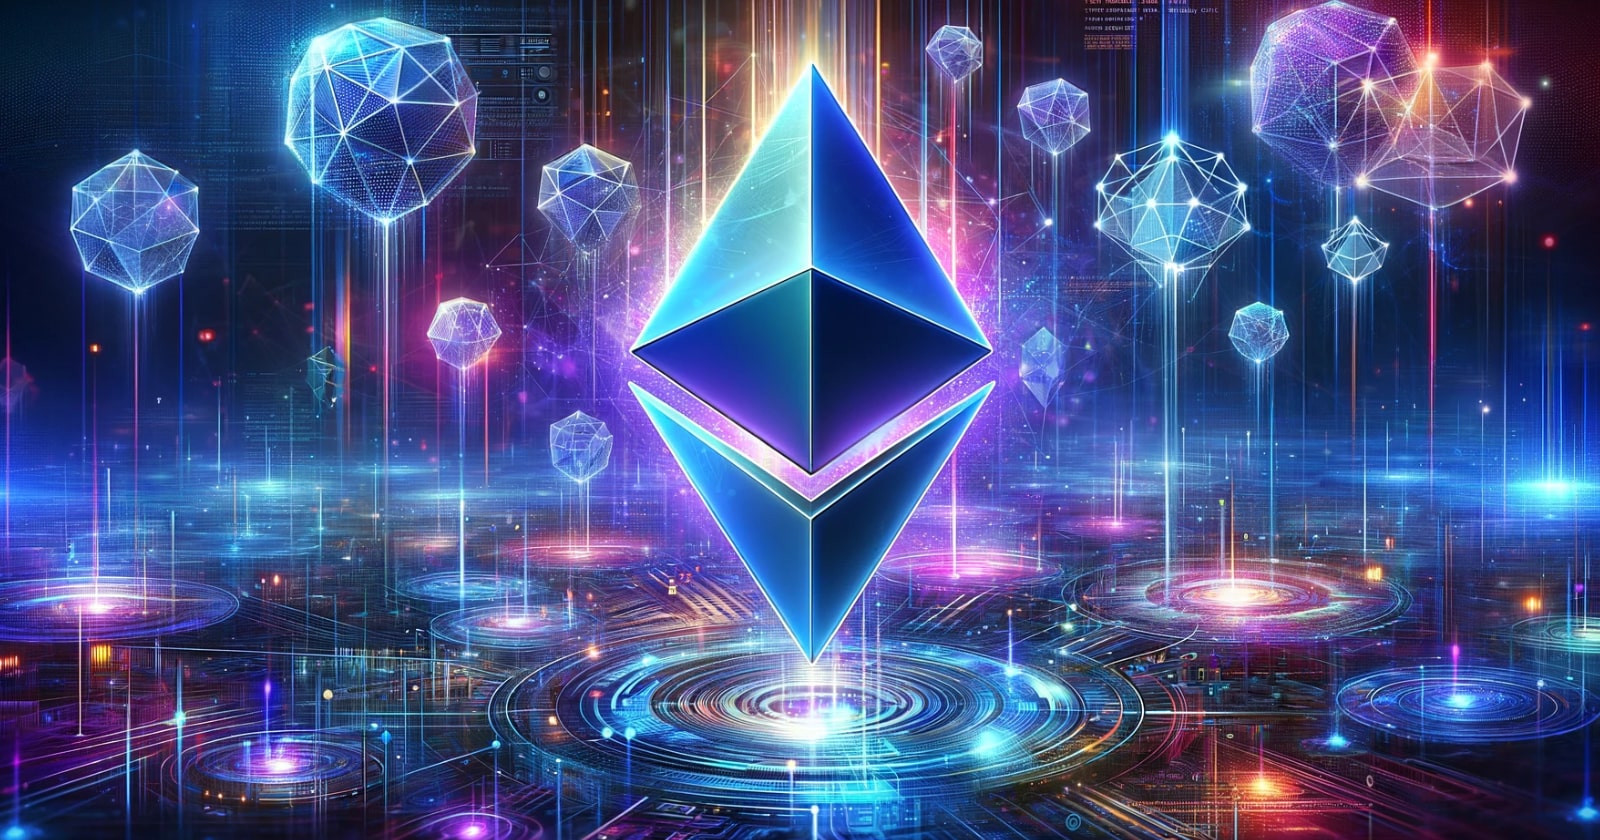 Ethereum has entered an upward trend again after 2 years!